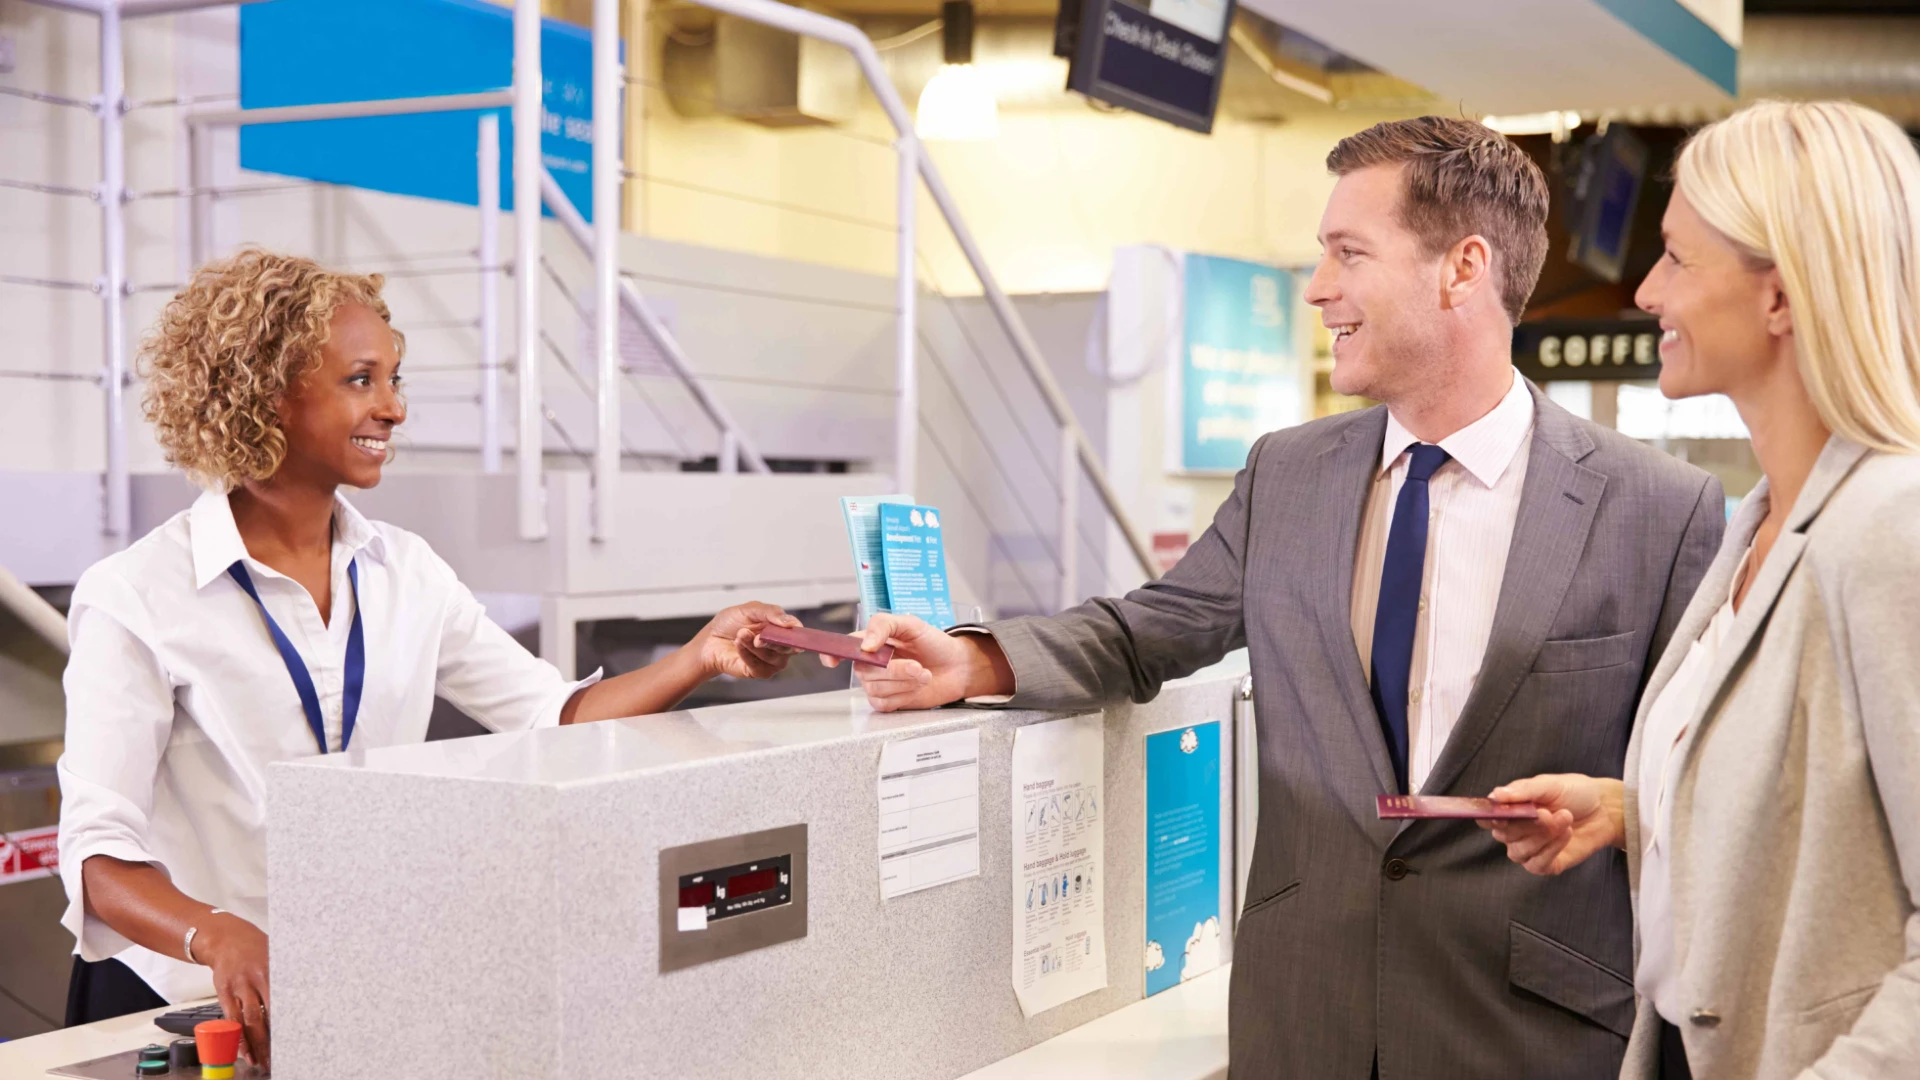 Transforming Airport Experience with Augmented Reality Apps